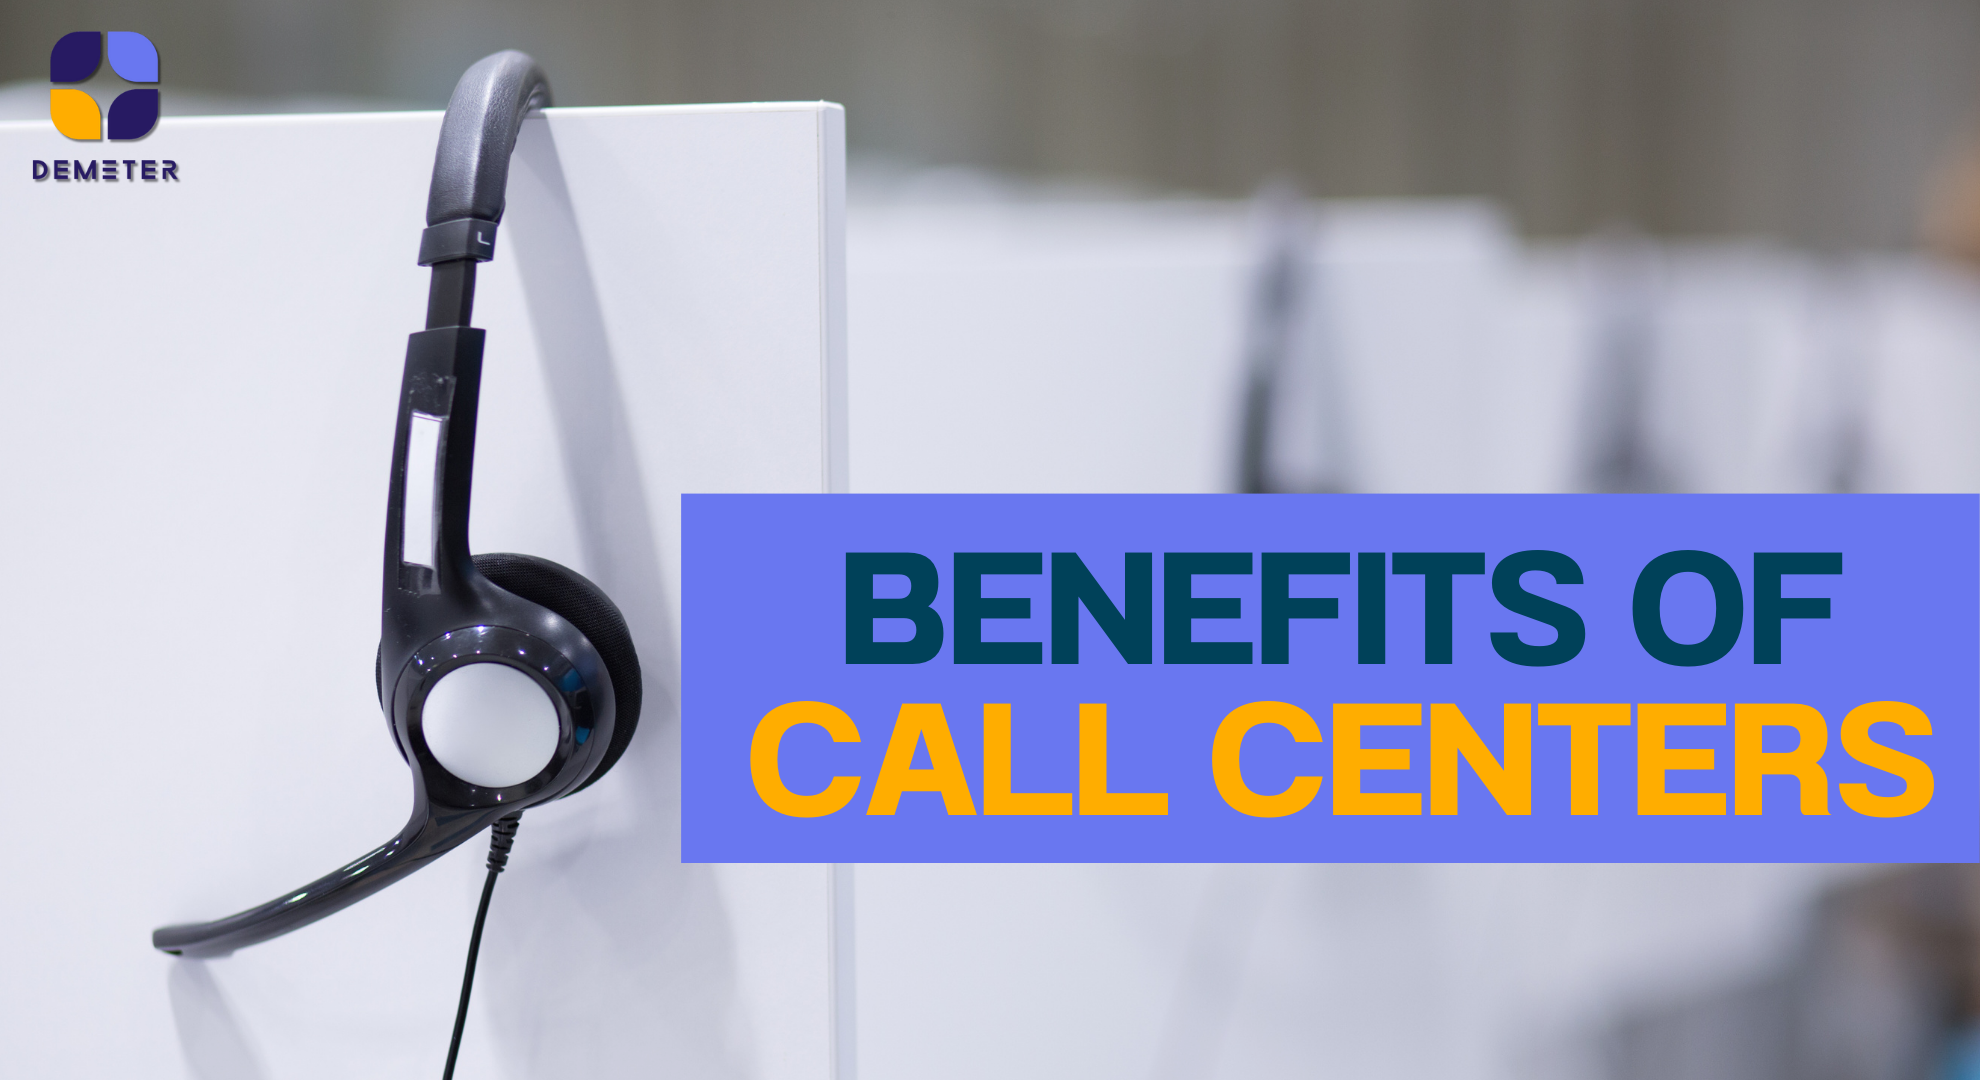 Benefits of call centers